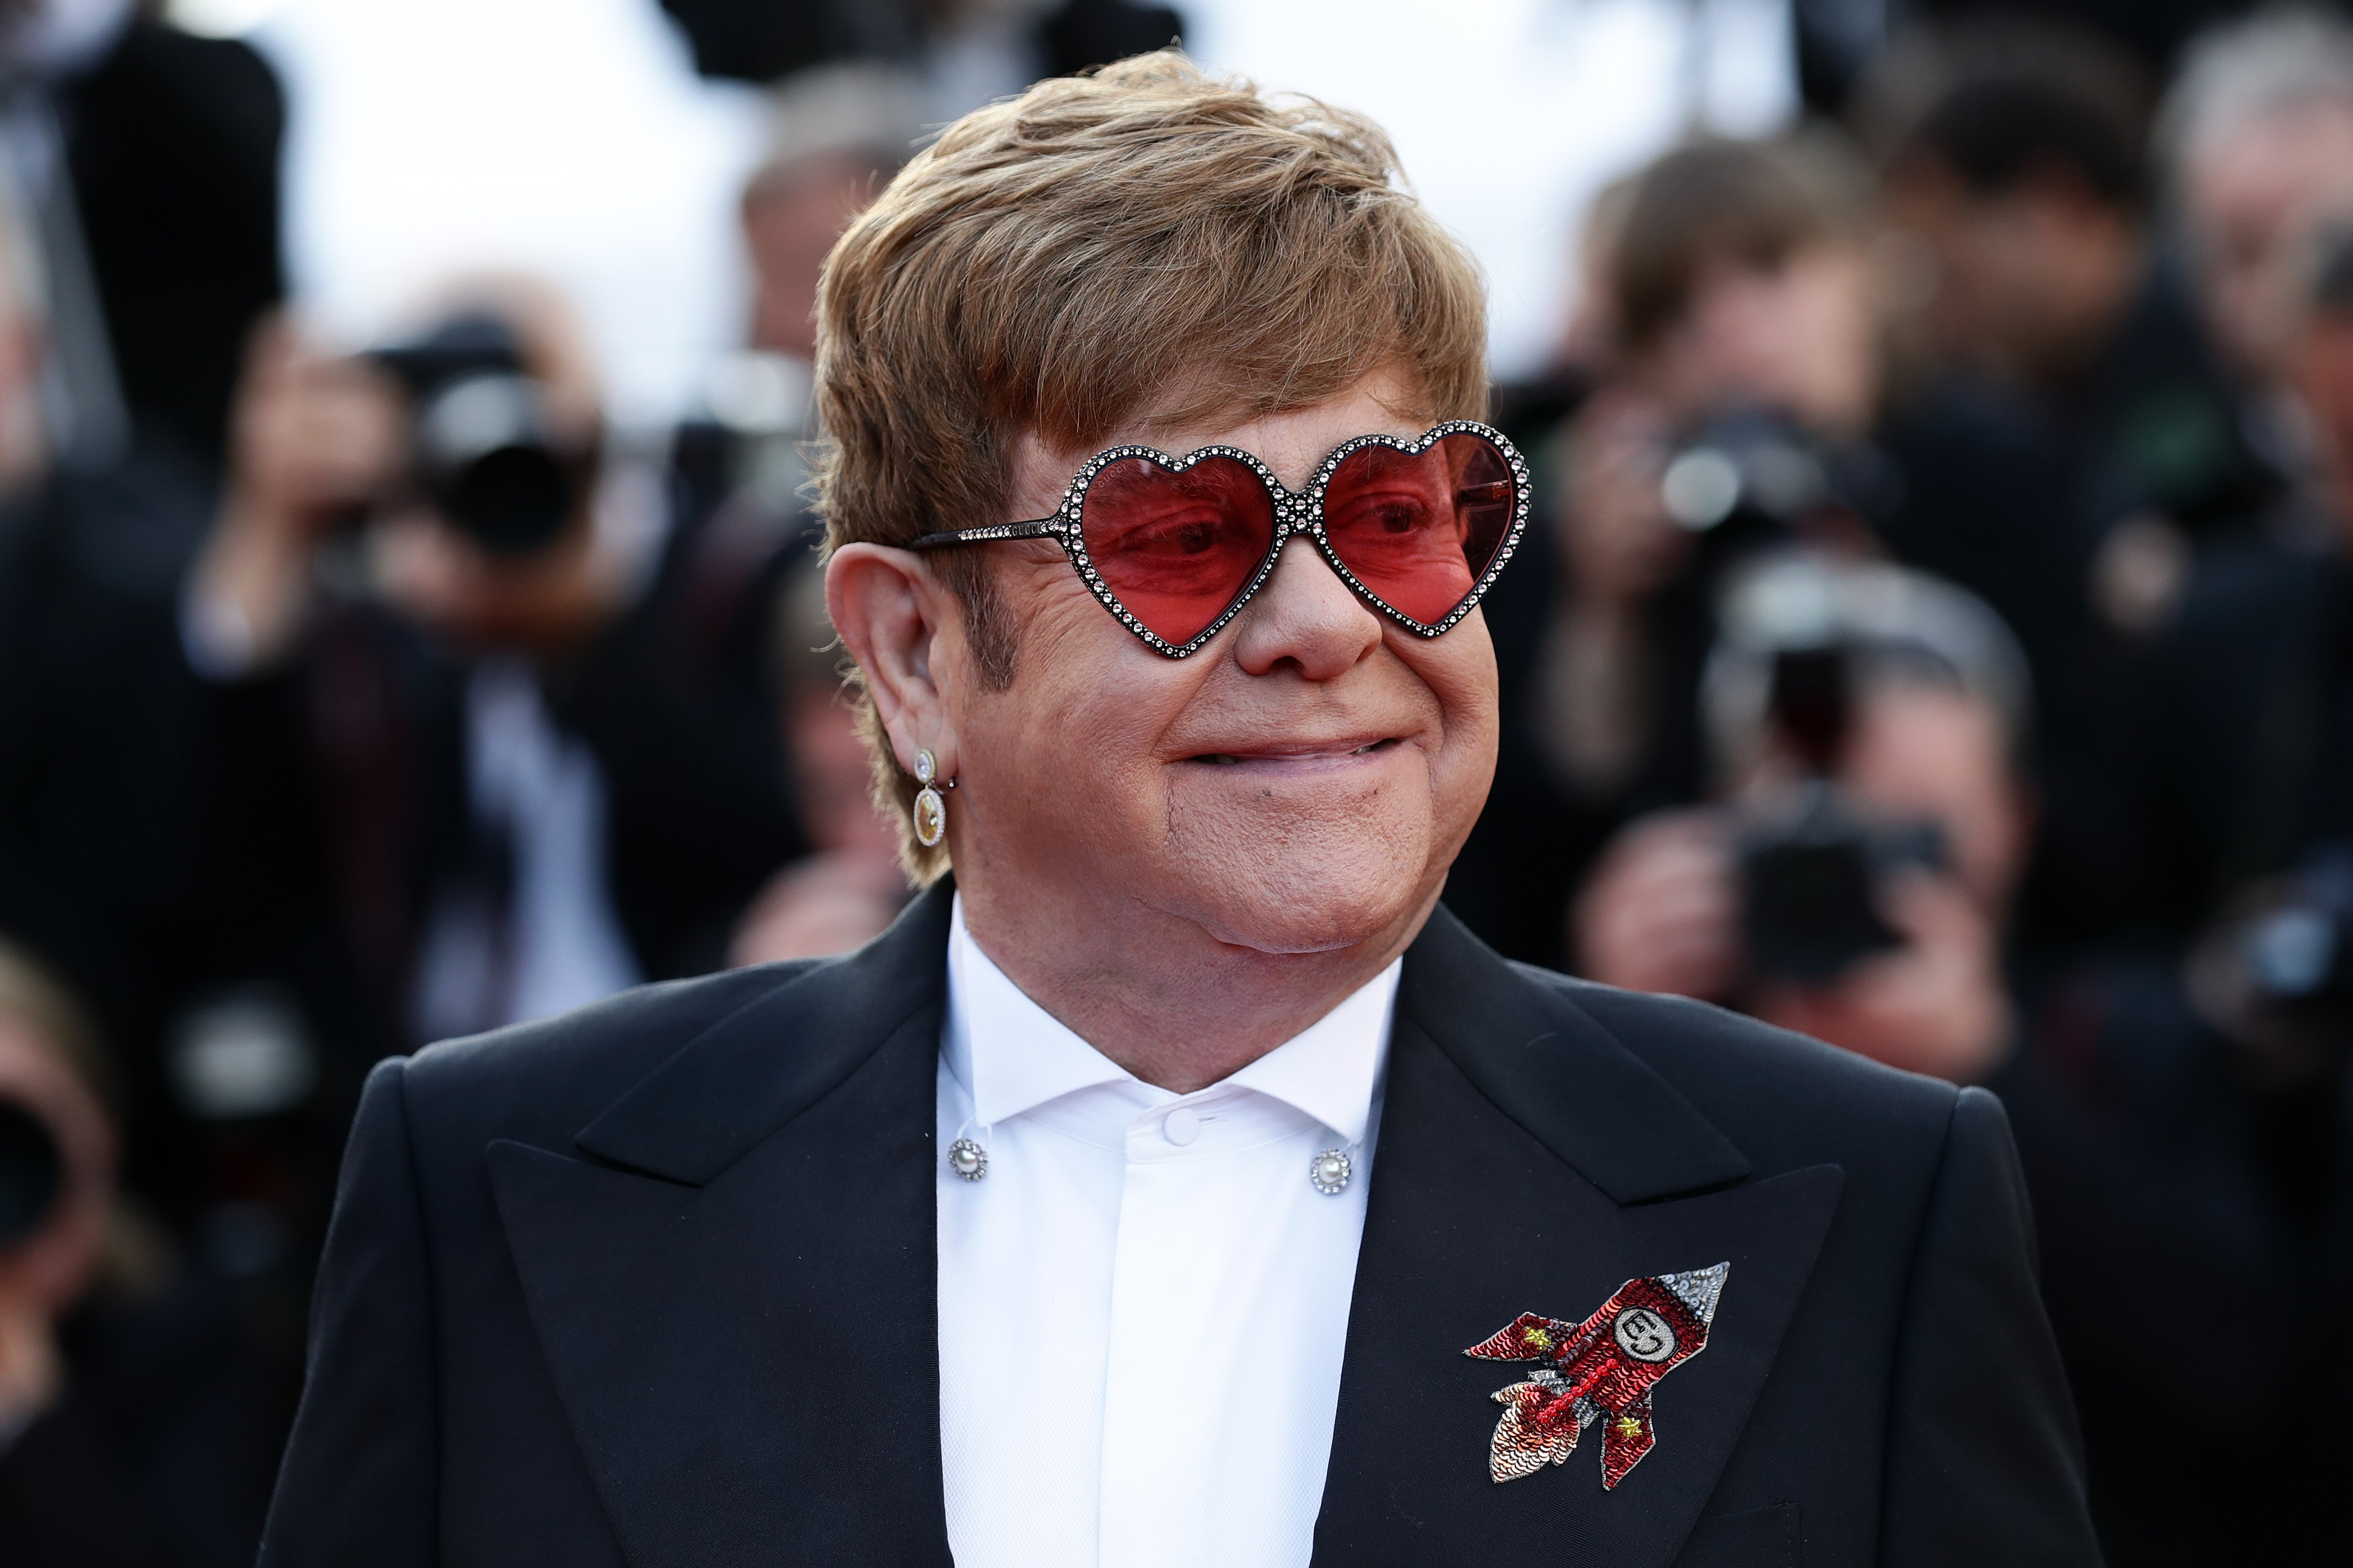 Sir Elton John attends the screening of "Rocketman" during the 72nd annual Cannes Film Festival on May 16, 2019. | Photo: Getty Images